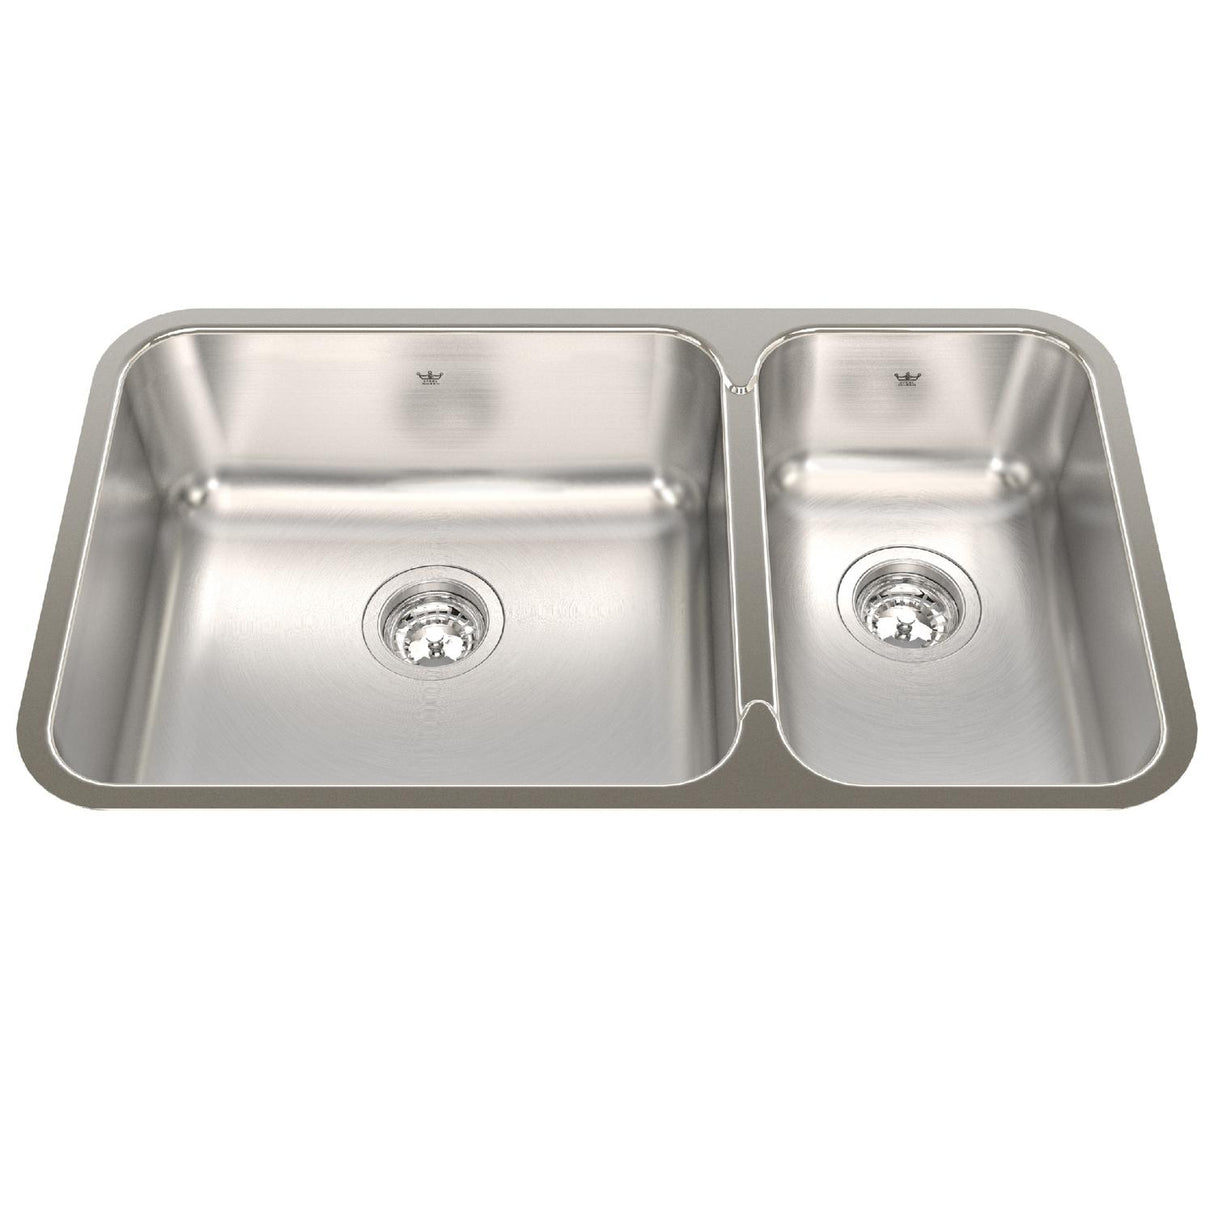 KINDRED QCUA1831R-8N Steel Queen 30.88-in LR x 17.75-in FB x 8-in DP Undermount Double Bowl Stainless Steel Kitchen Sink In Satin Finished Bowls with Silk Finished Rim